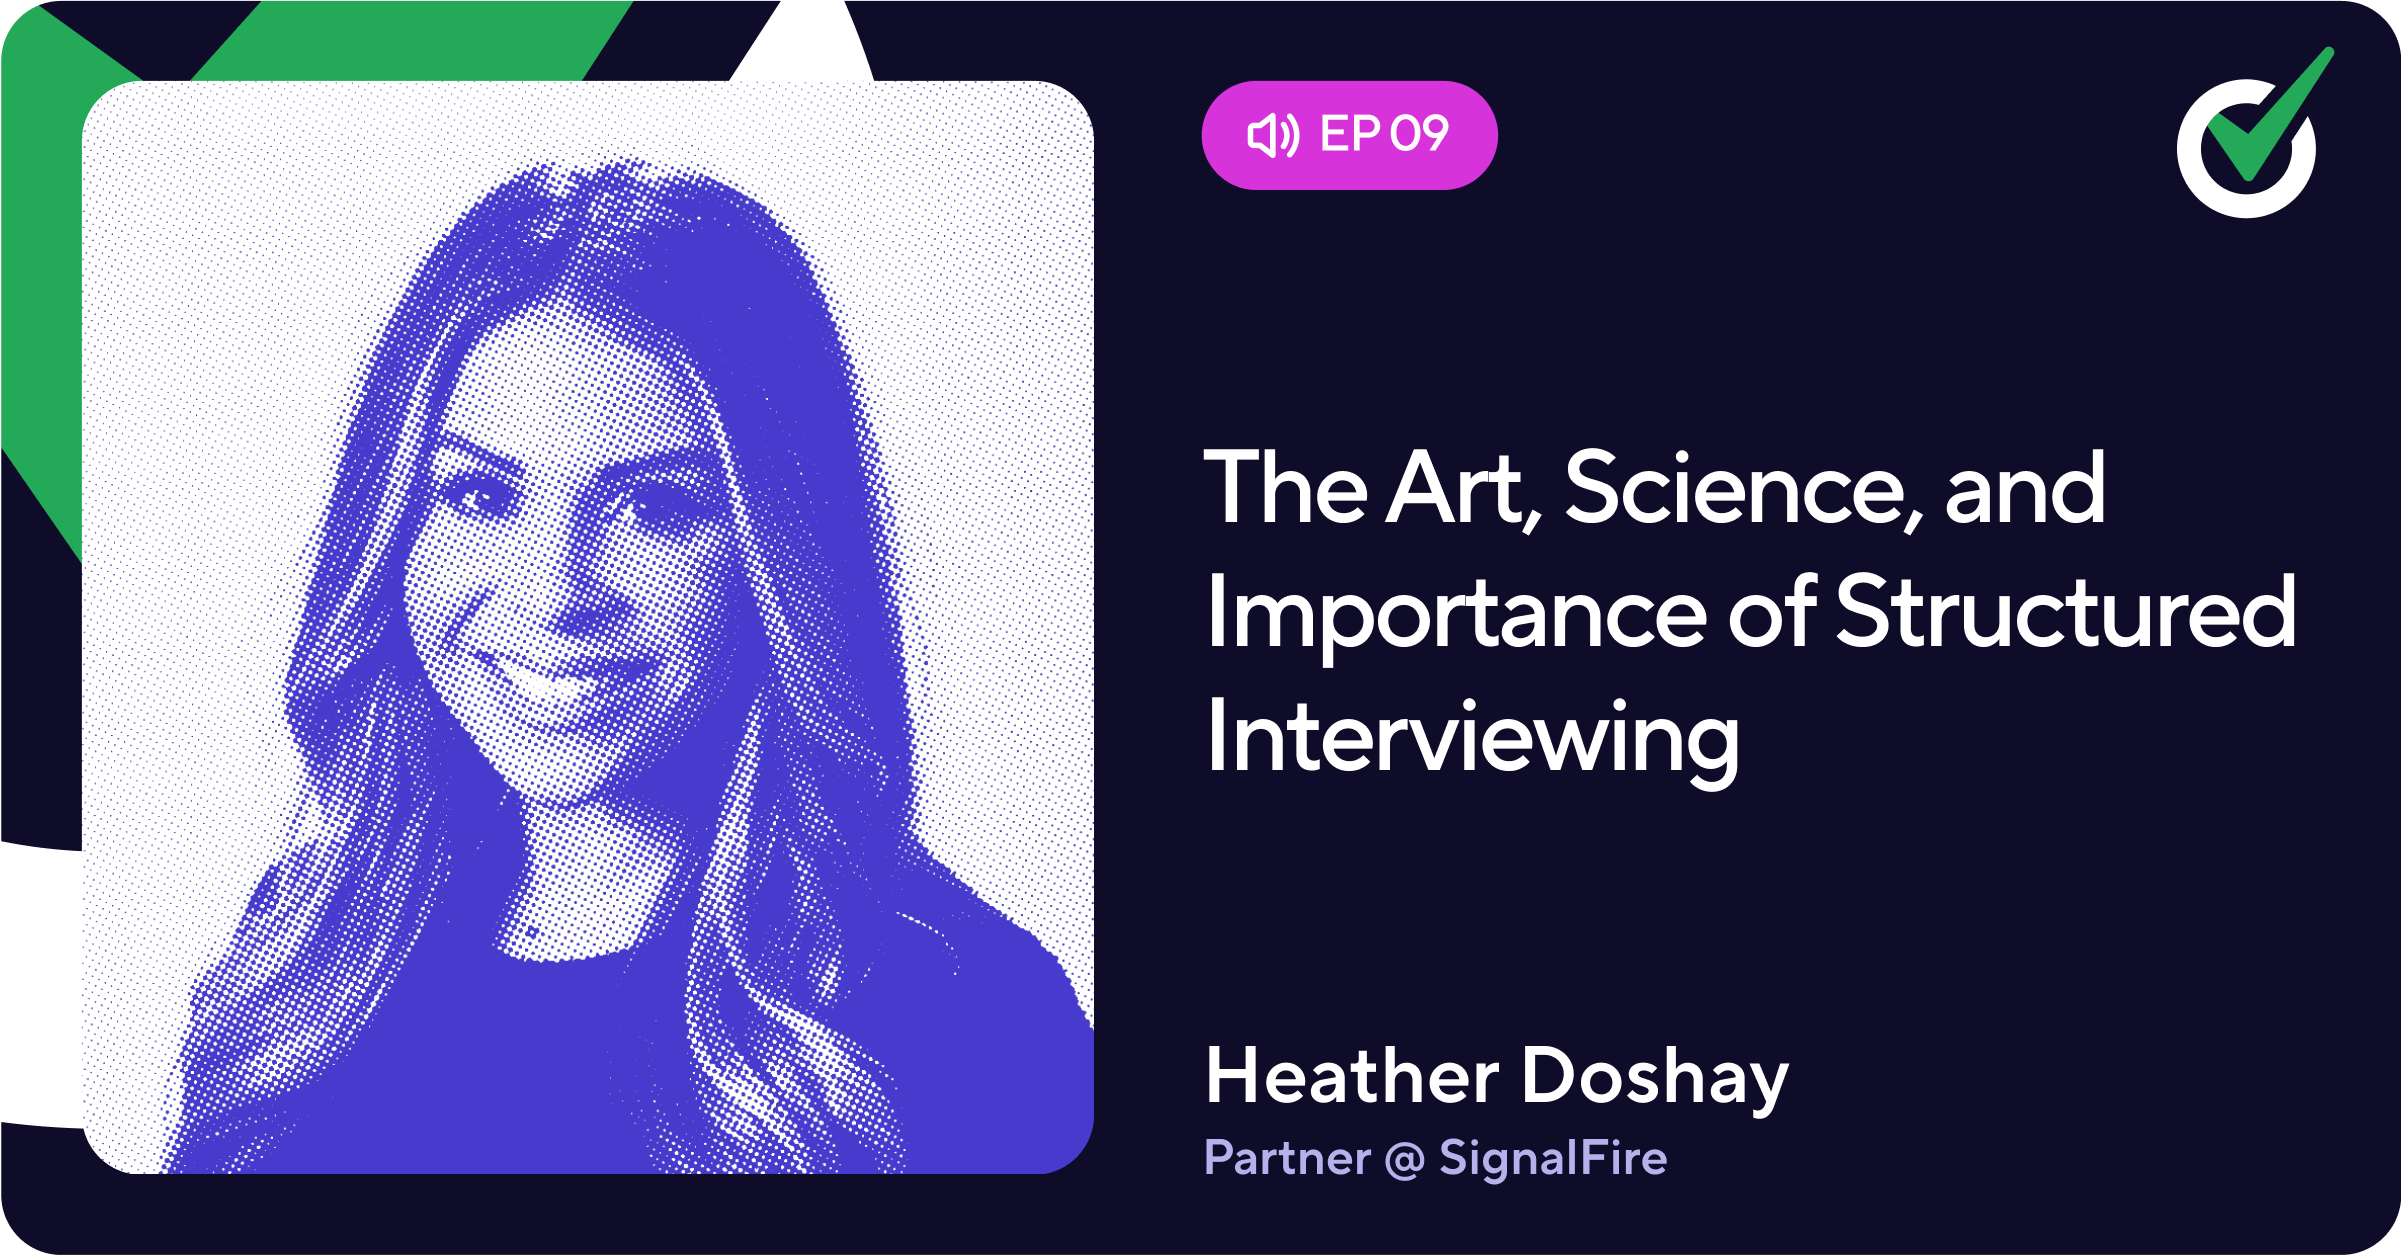 Episode 9 - The Art, Science, and Importance of Structured Interviewing